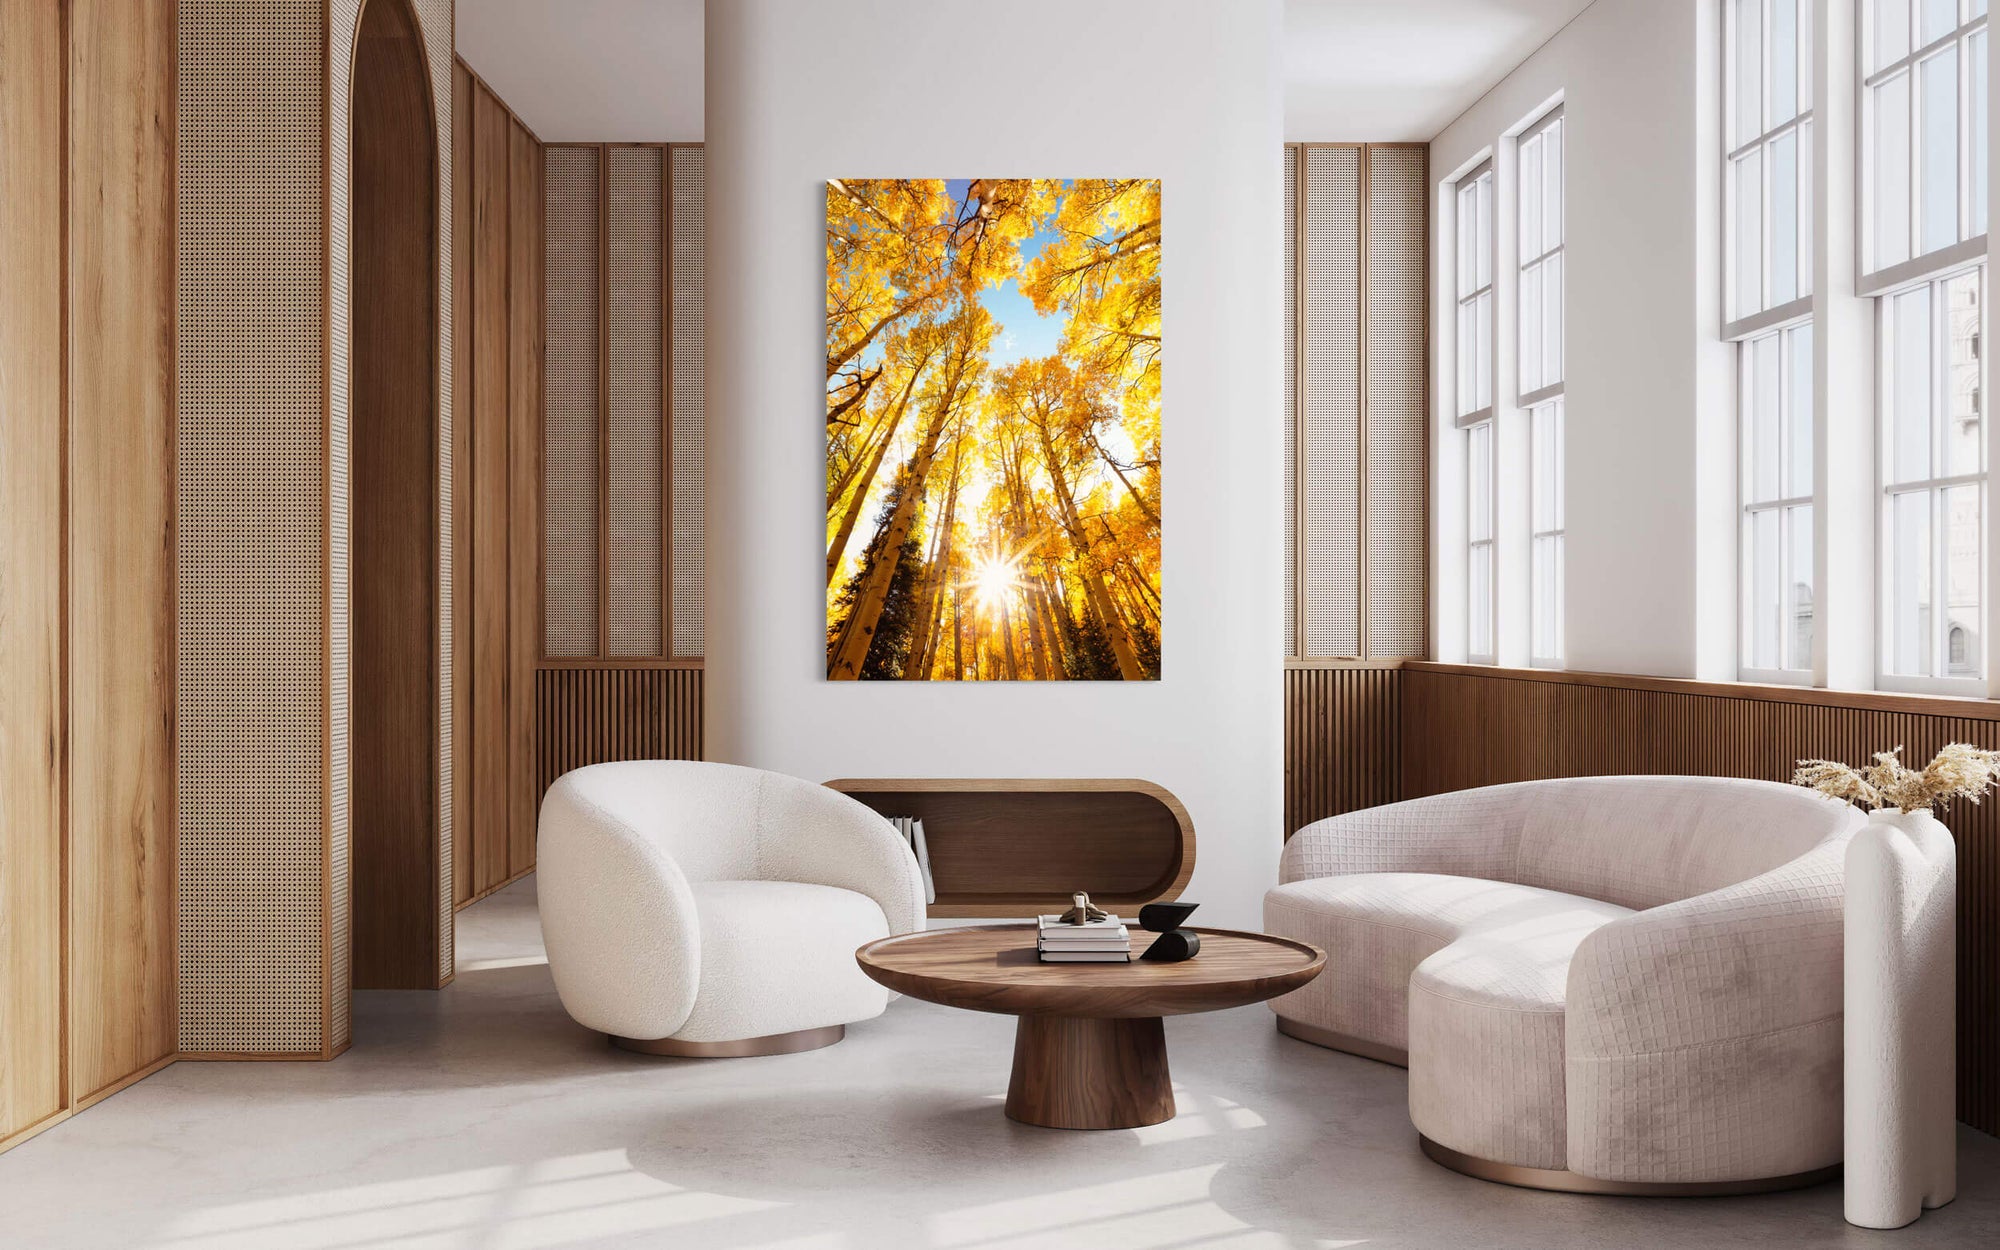 A Kebler Pass picture showing the Crested Butte fall colors hangs in a living room.